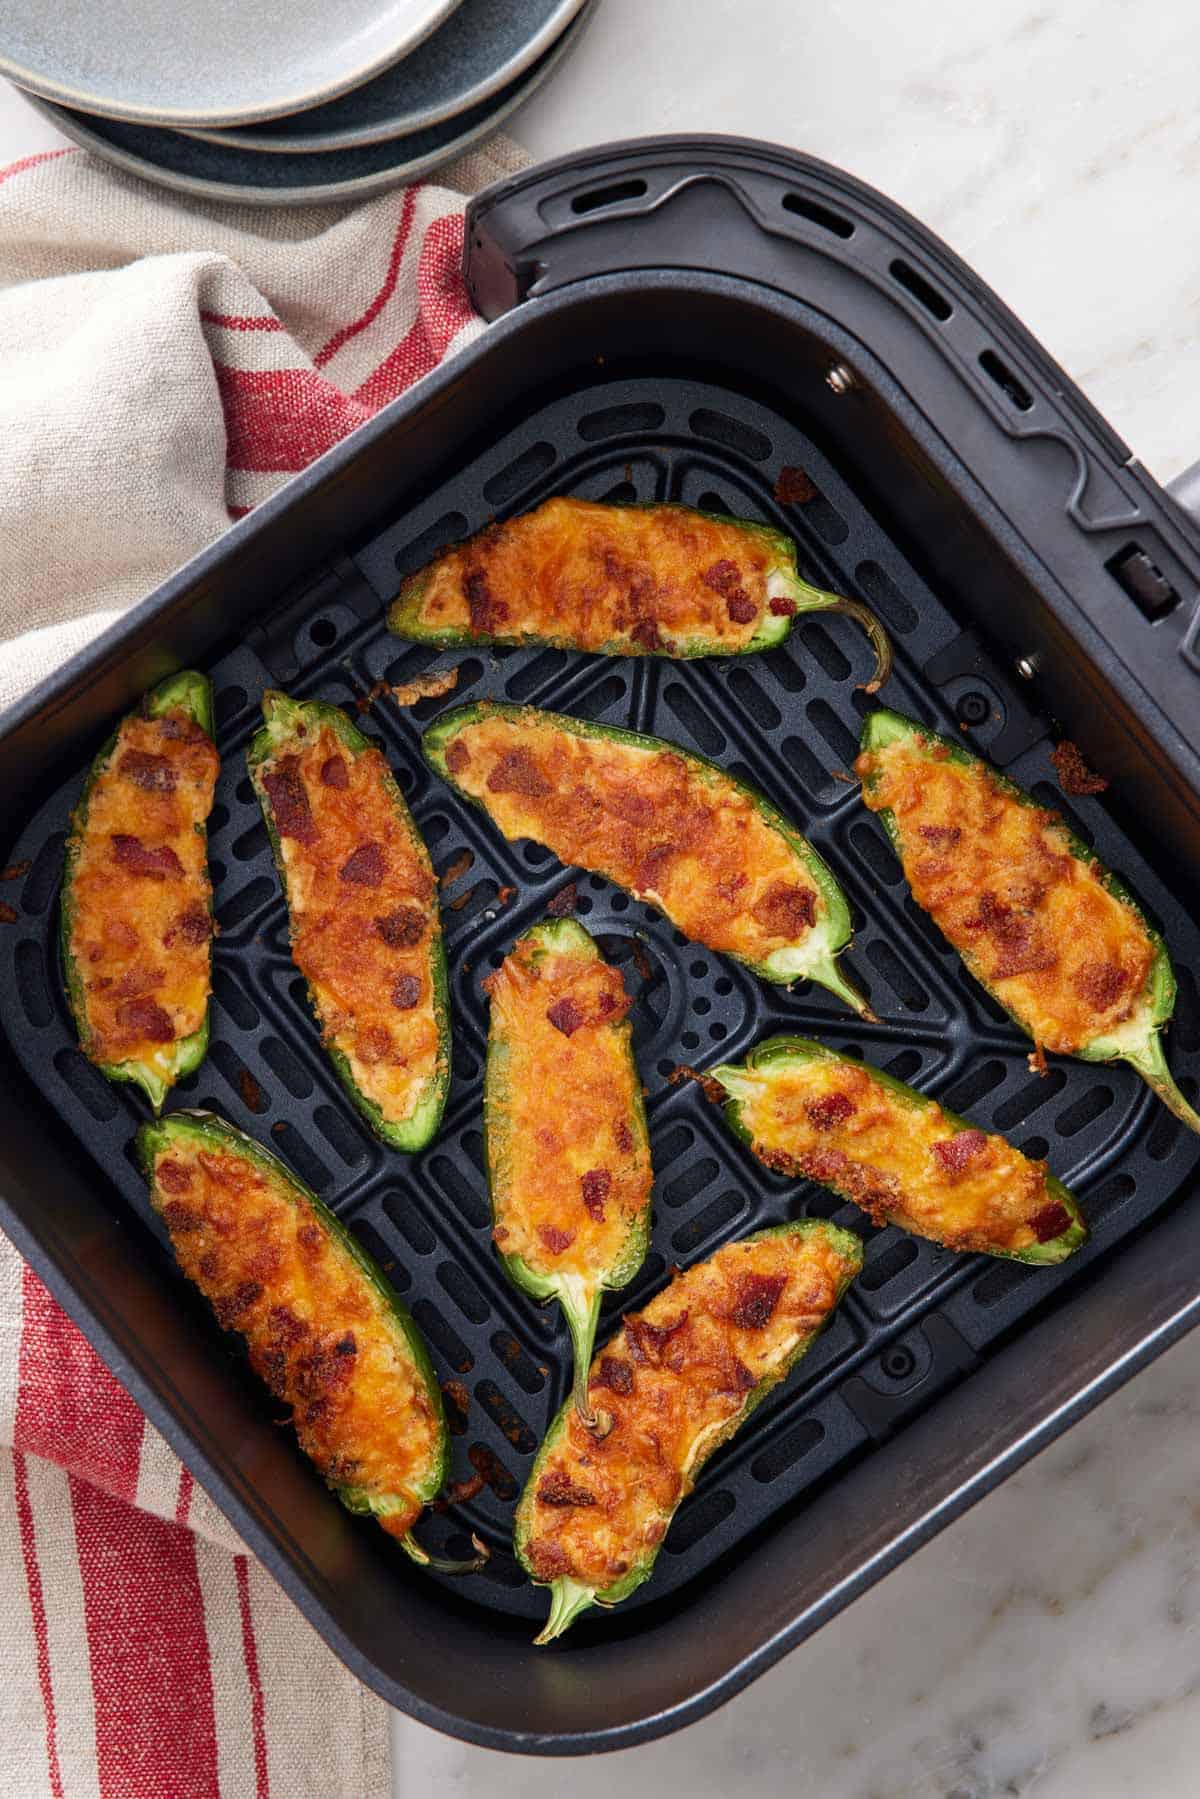 Overhead view of jalapeno poppers in an air fryer basket.